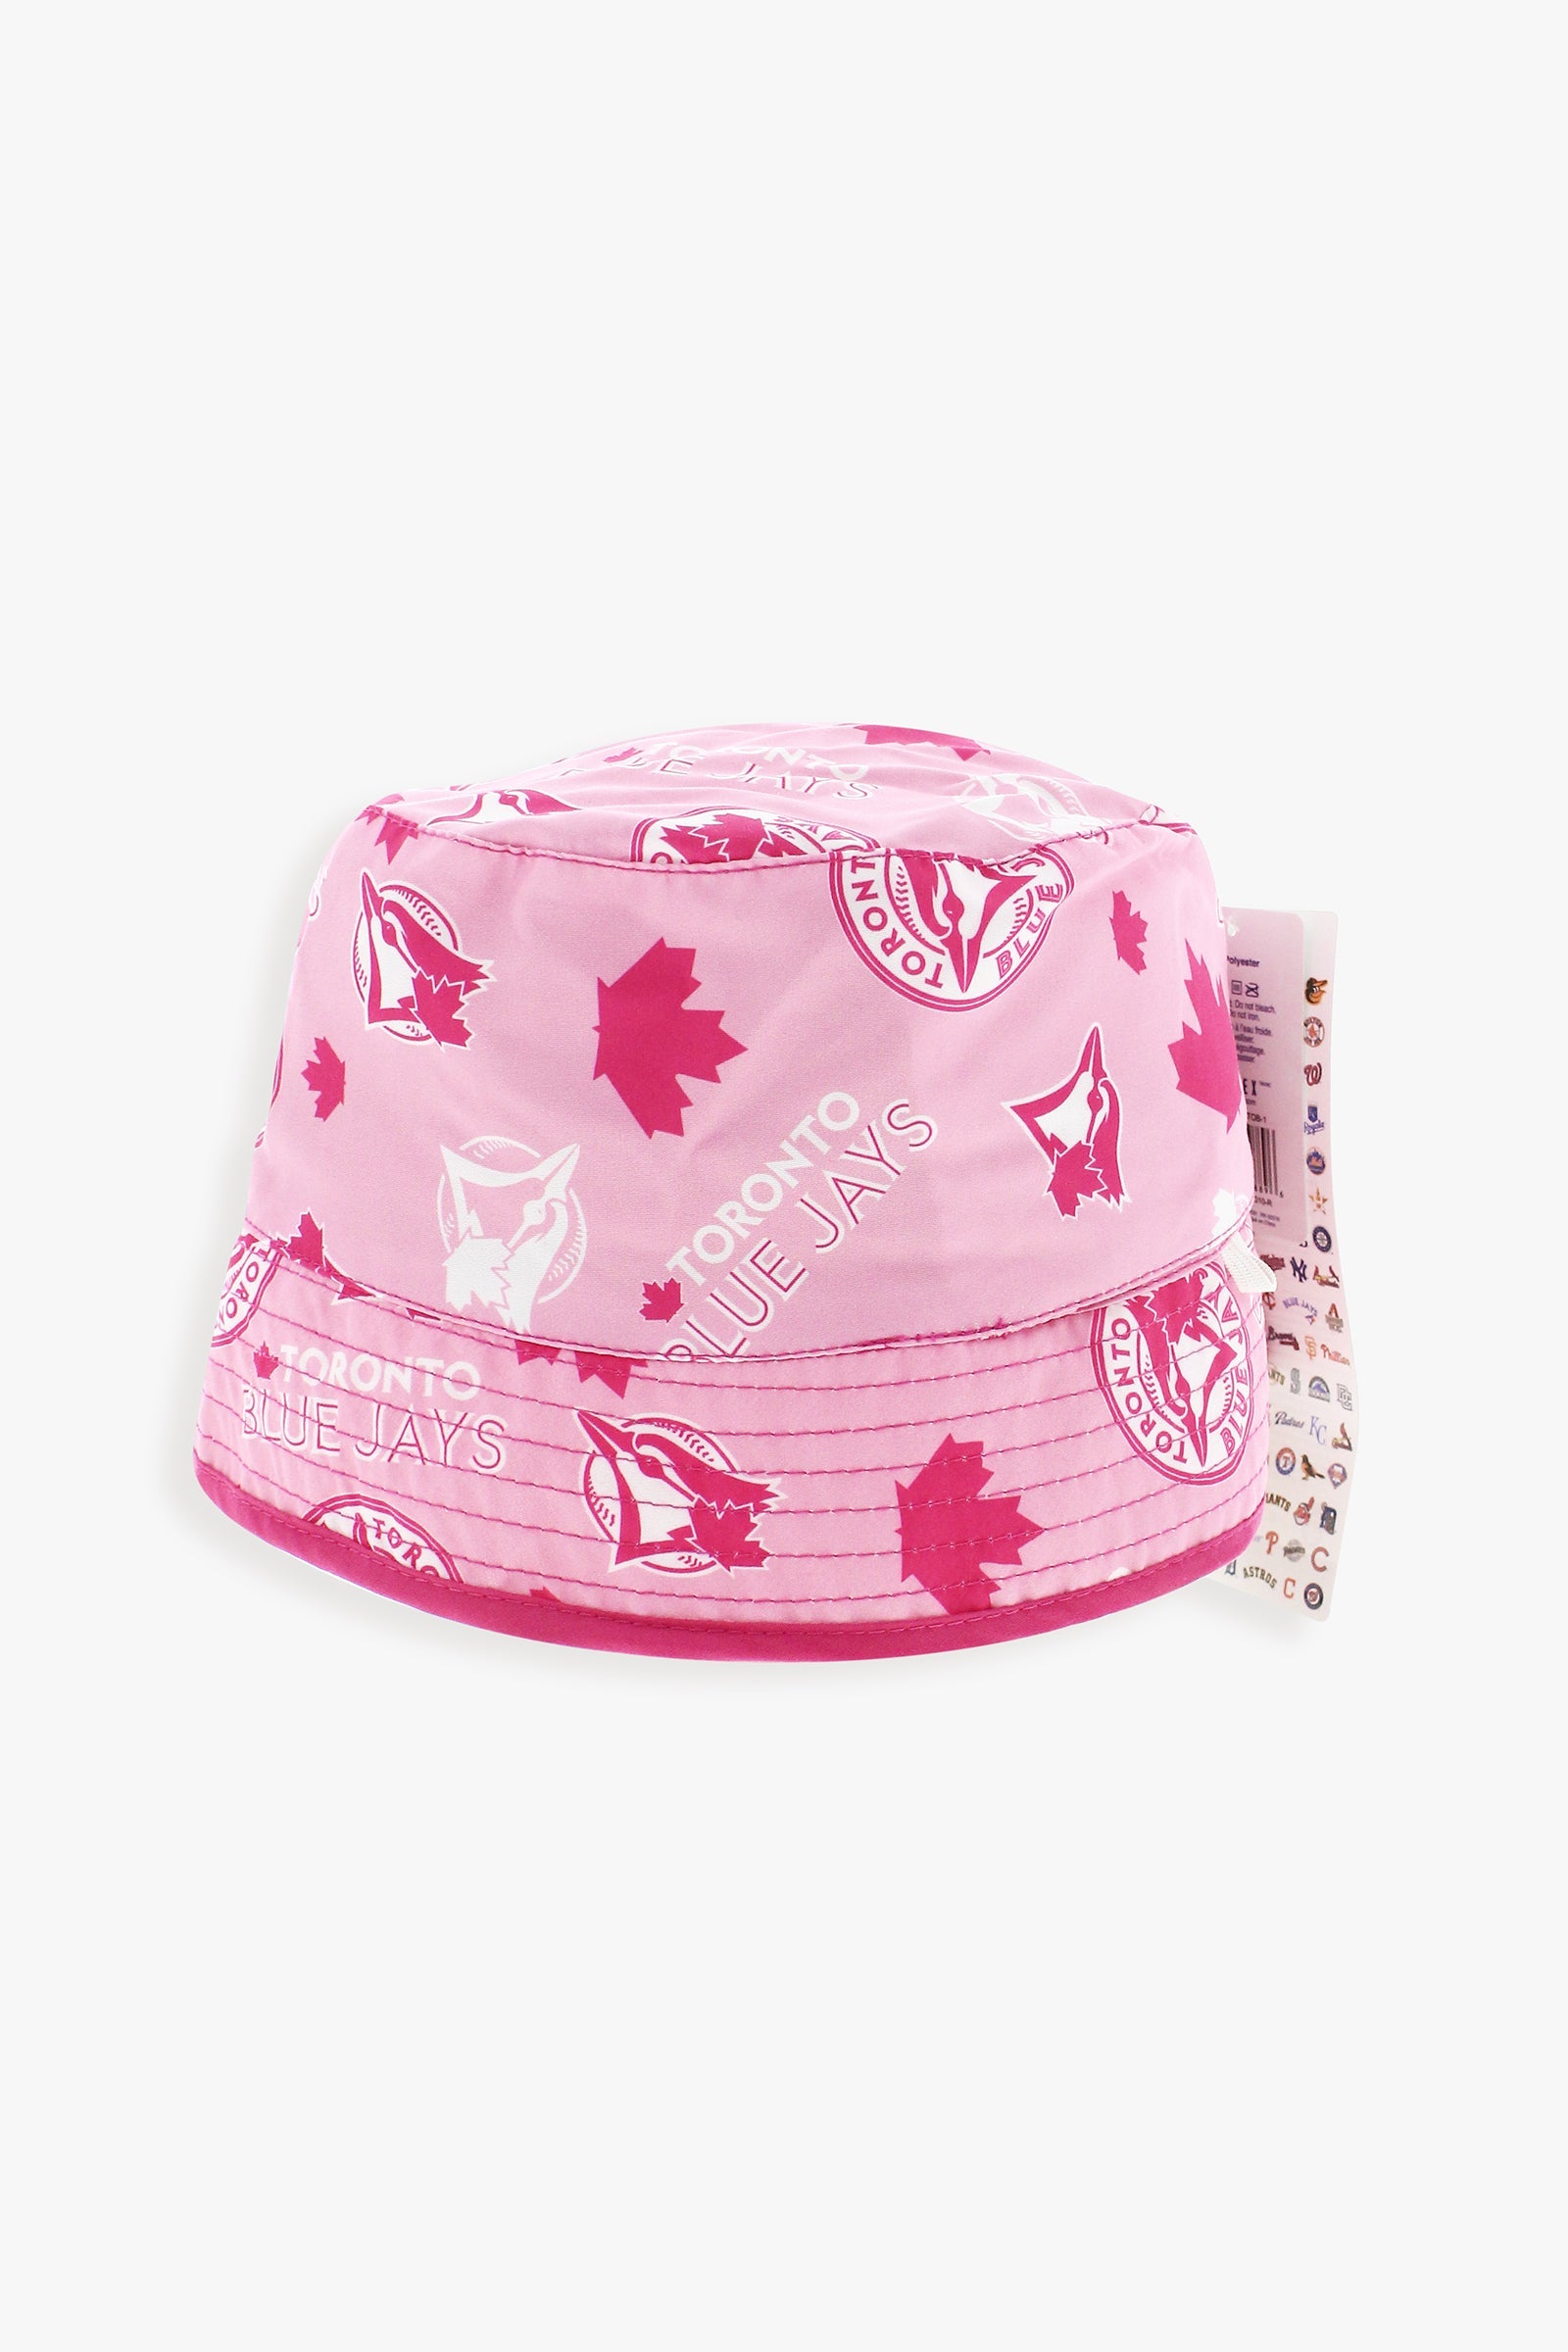 MLB Toronto Blue Jays Youth Girls 4-6T Packable Bucket Hat